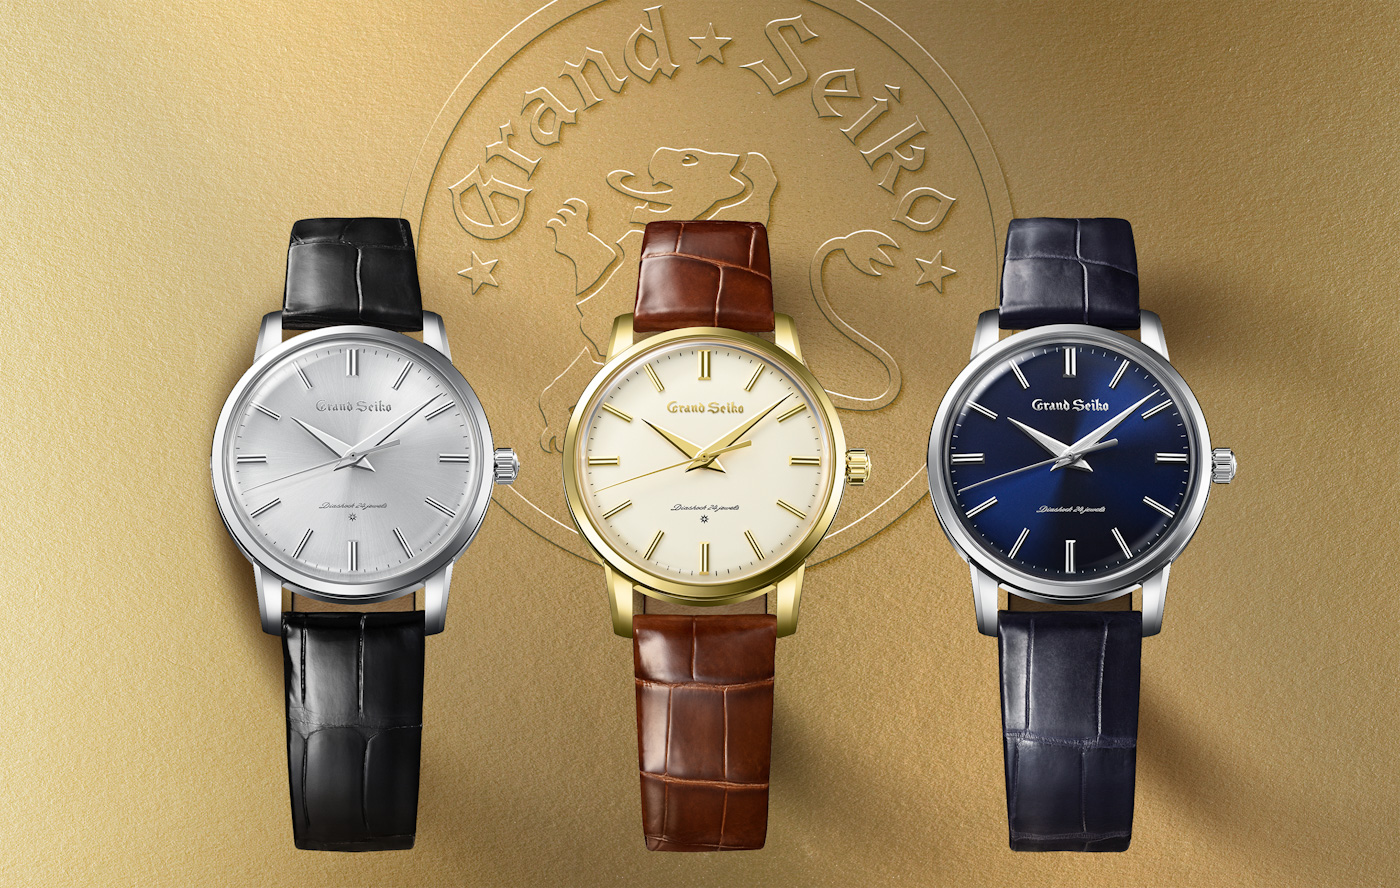 Grand Seiko Continues 60th Anniversary Celebrations With New 1960 Re-Creation Models And New Dedicated Studio In Shizukuishi